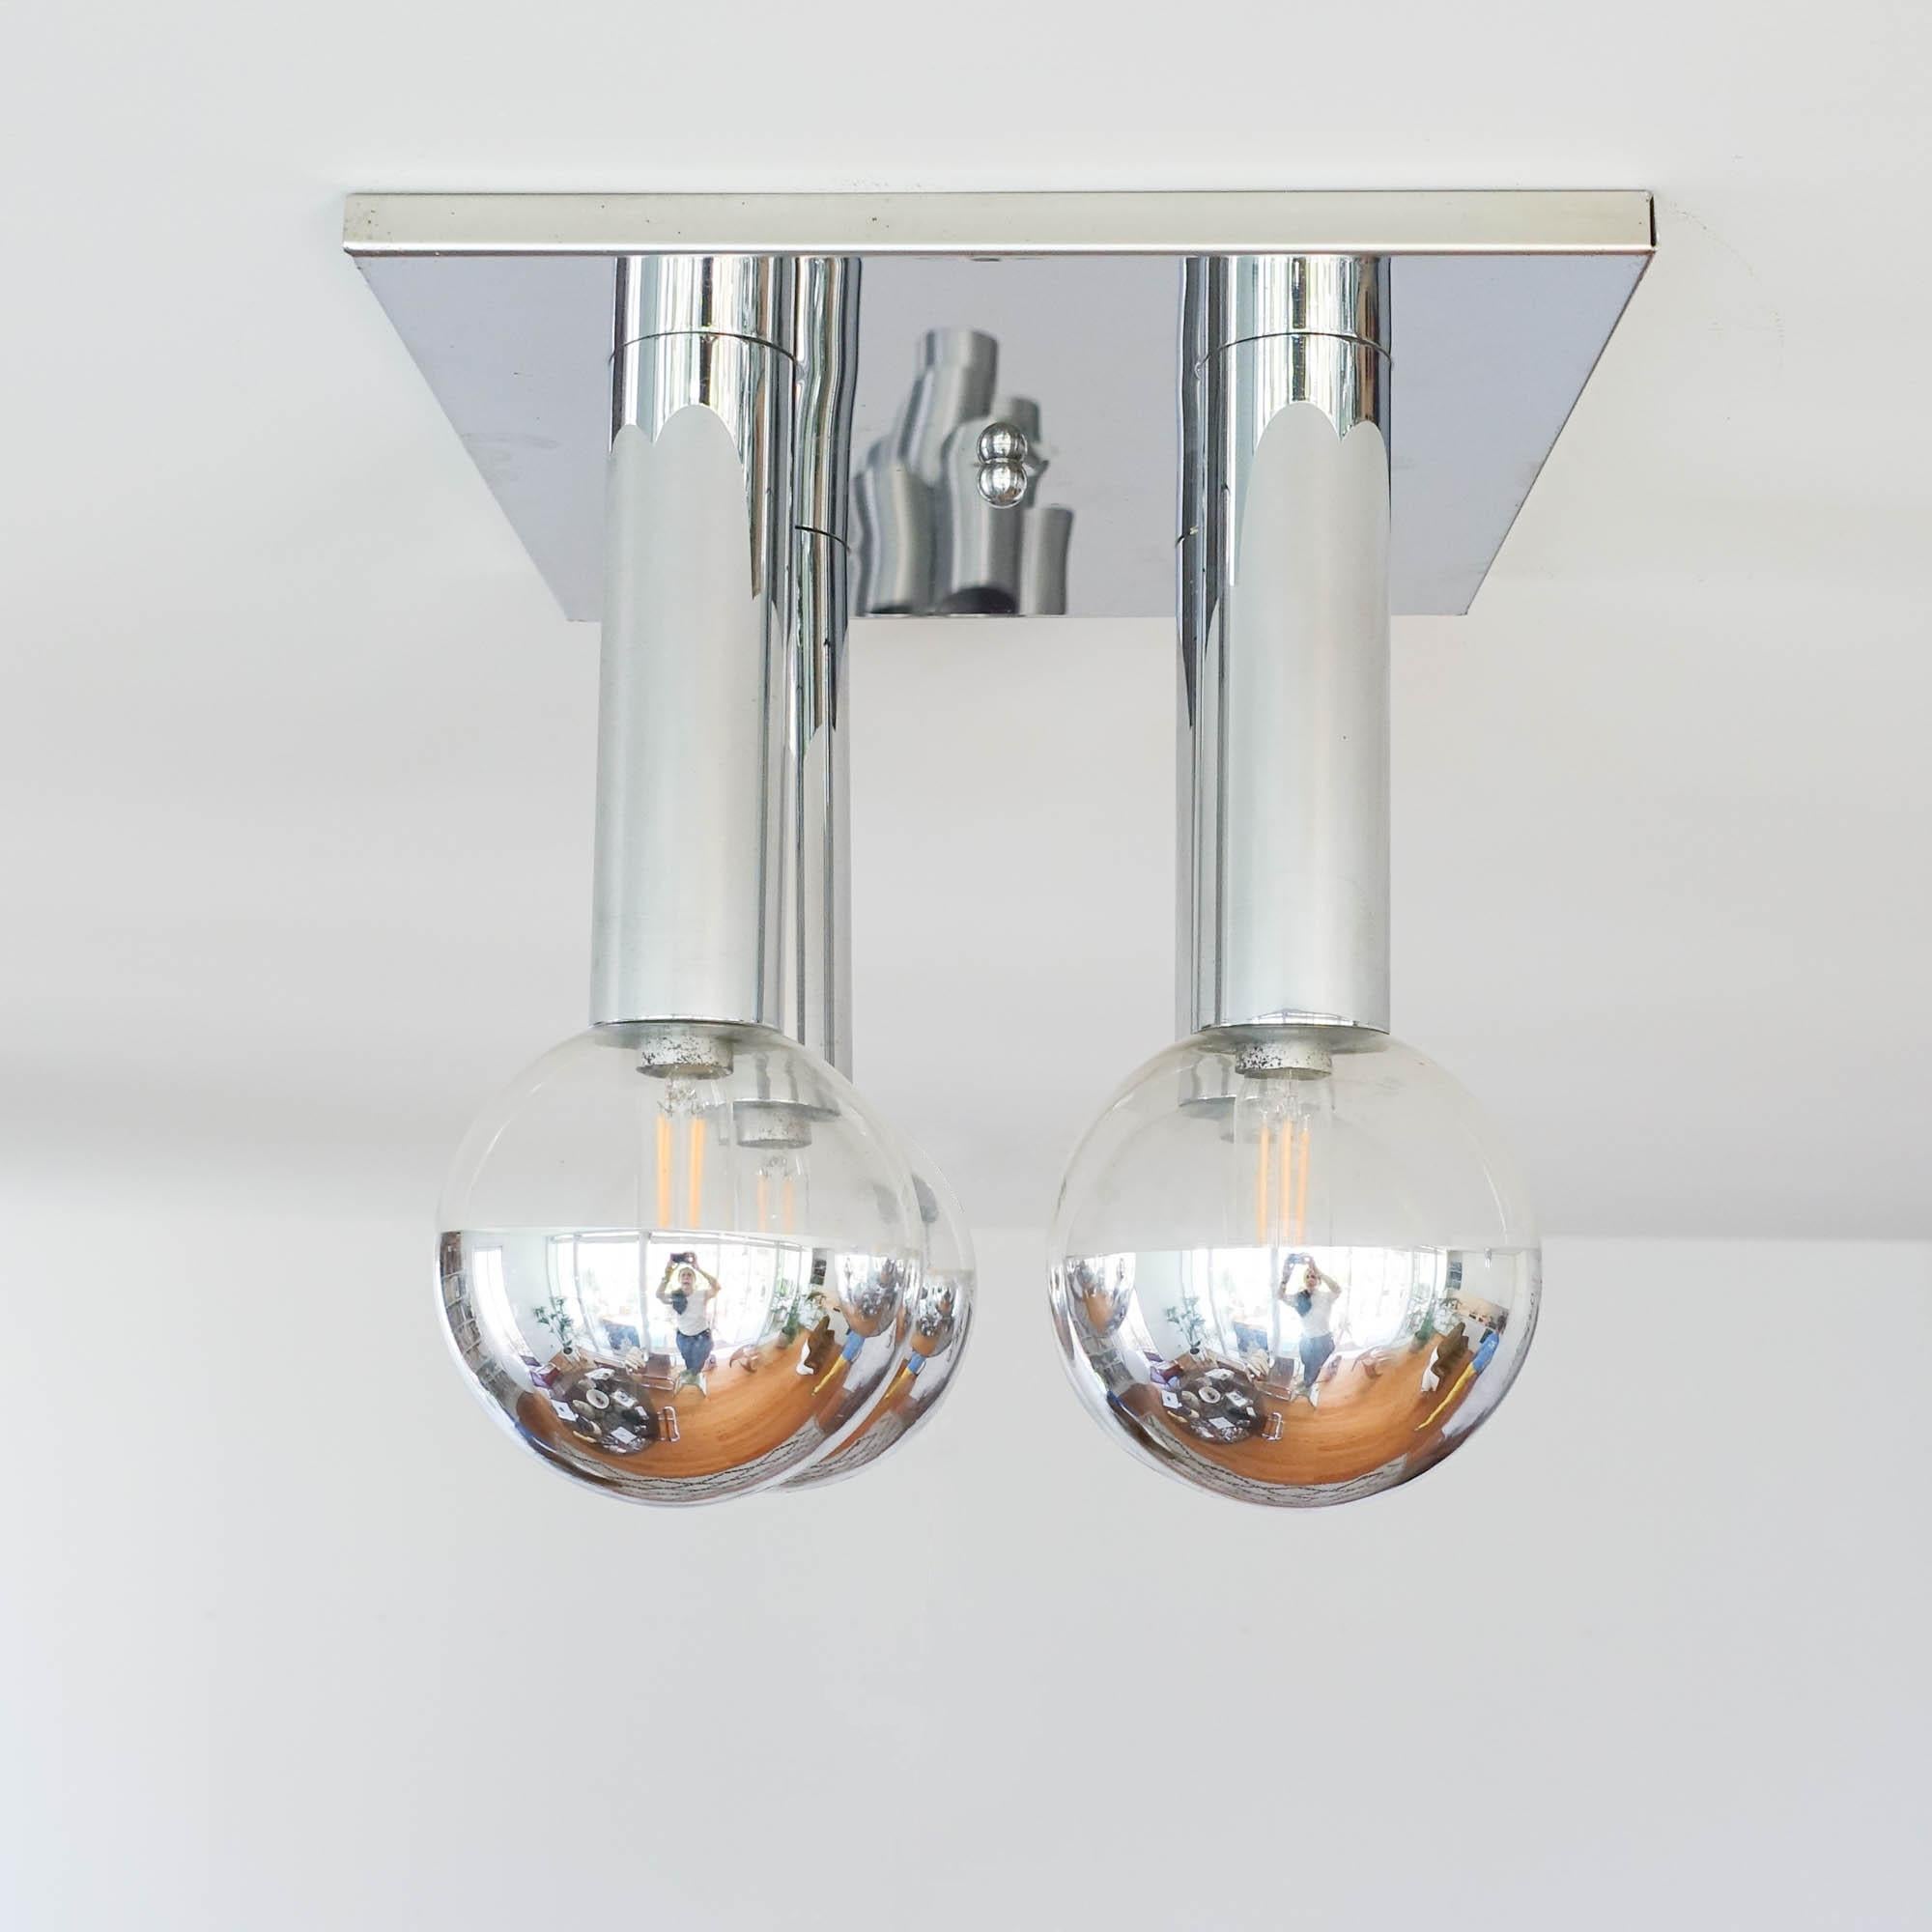 Mid-Century Modern Vintage Space Age Ceiling Lamp by Motoko Ishii for Staff, 1970s